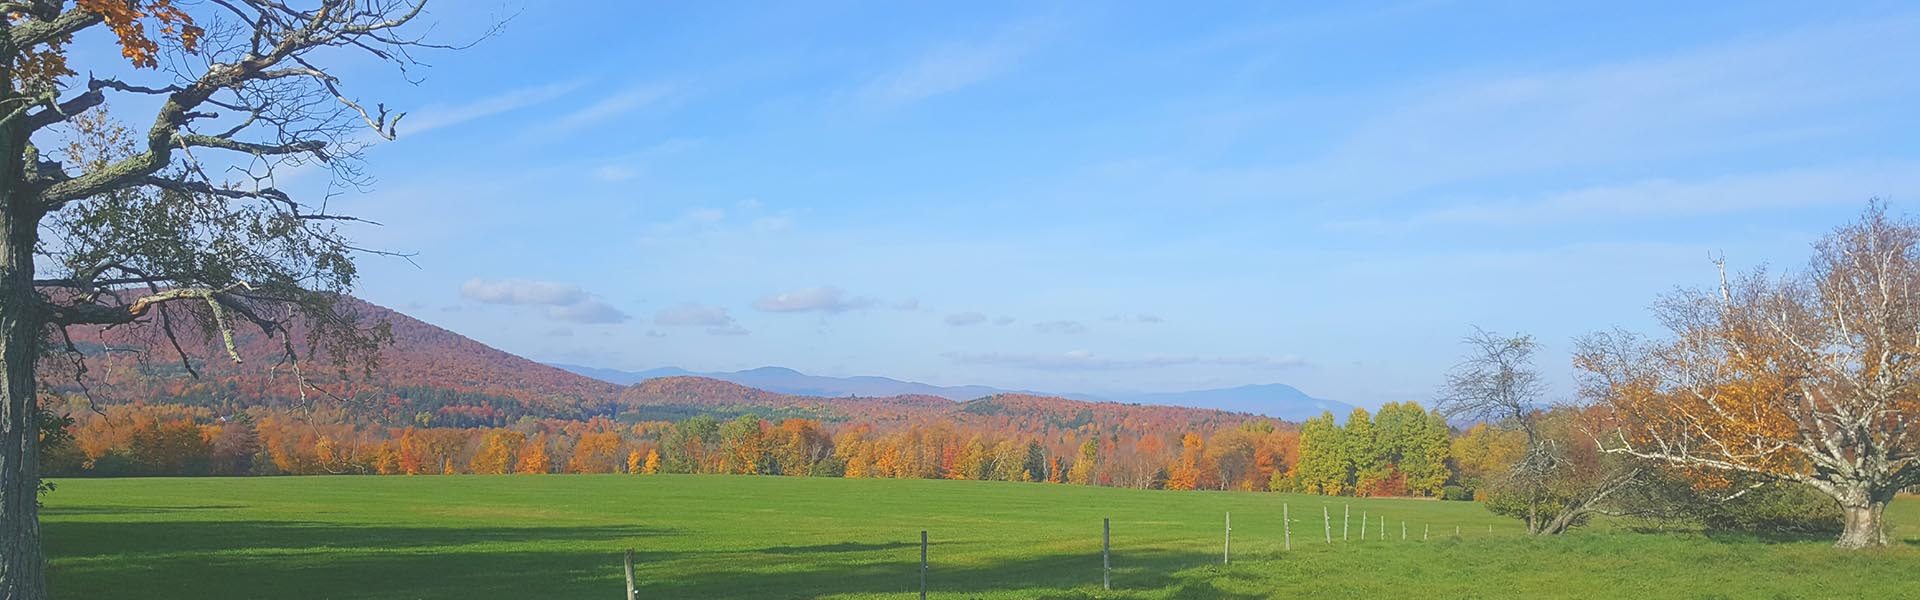 Vermont field in the fall